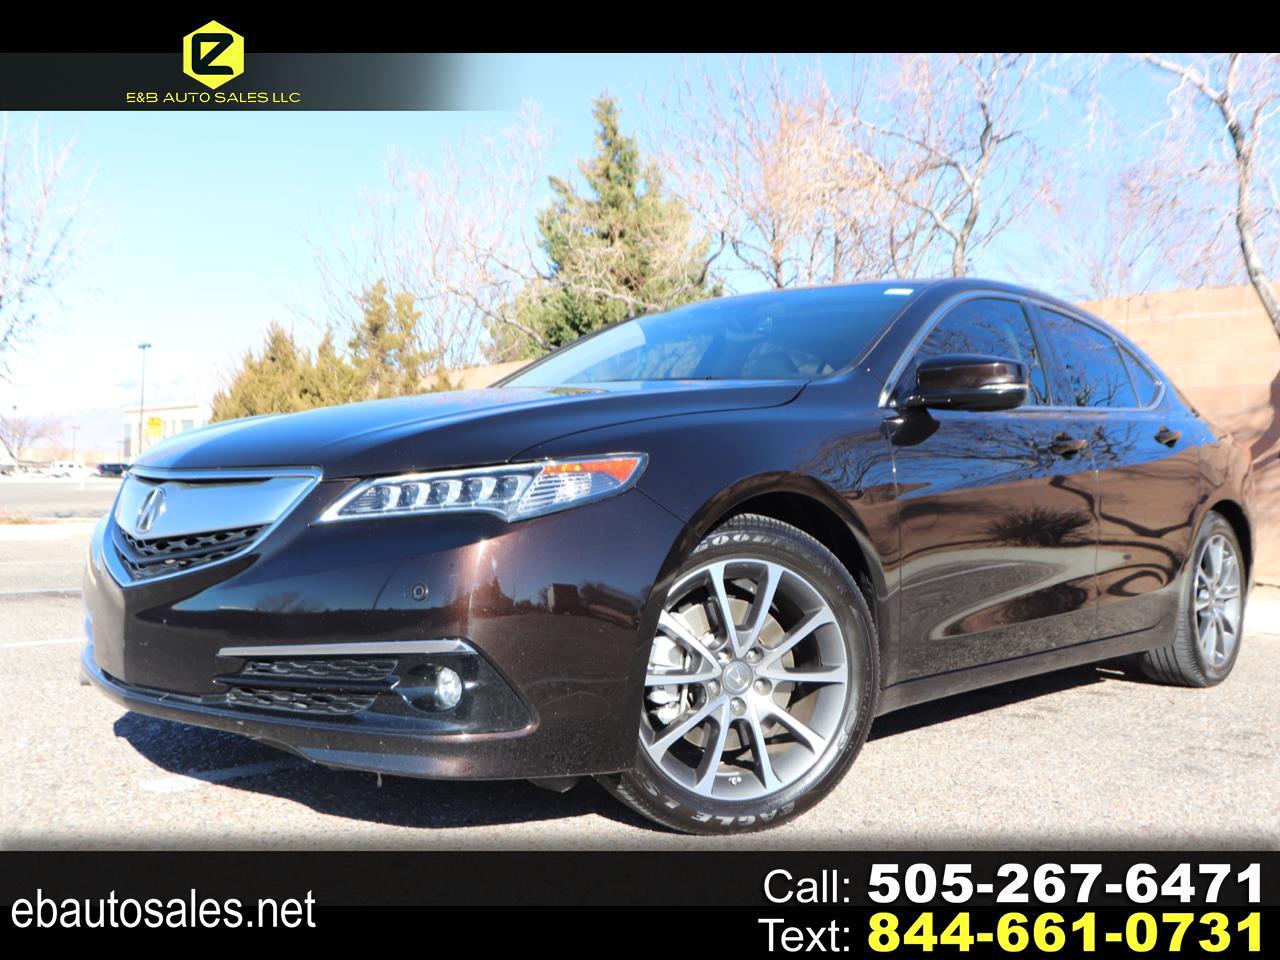 2015 Acura TLX 9-Spd AT SH-AWD w/Advance Package